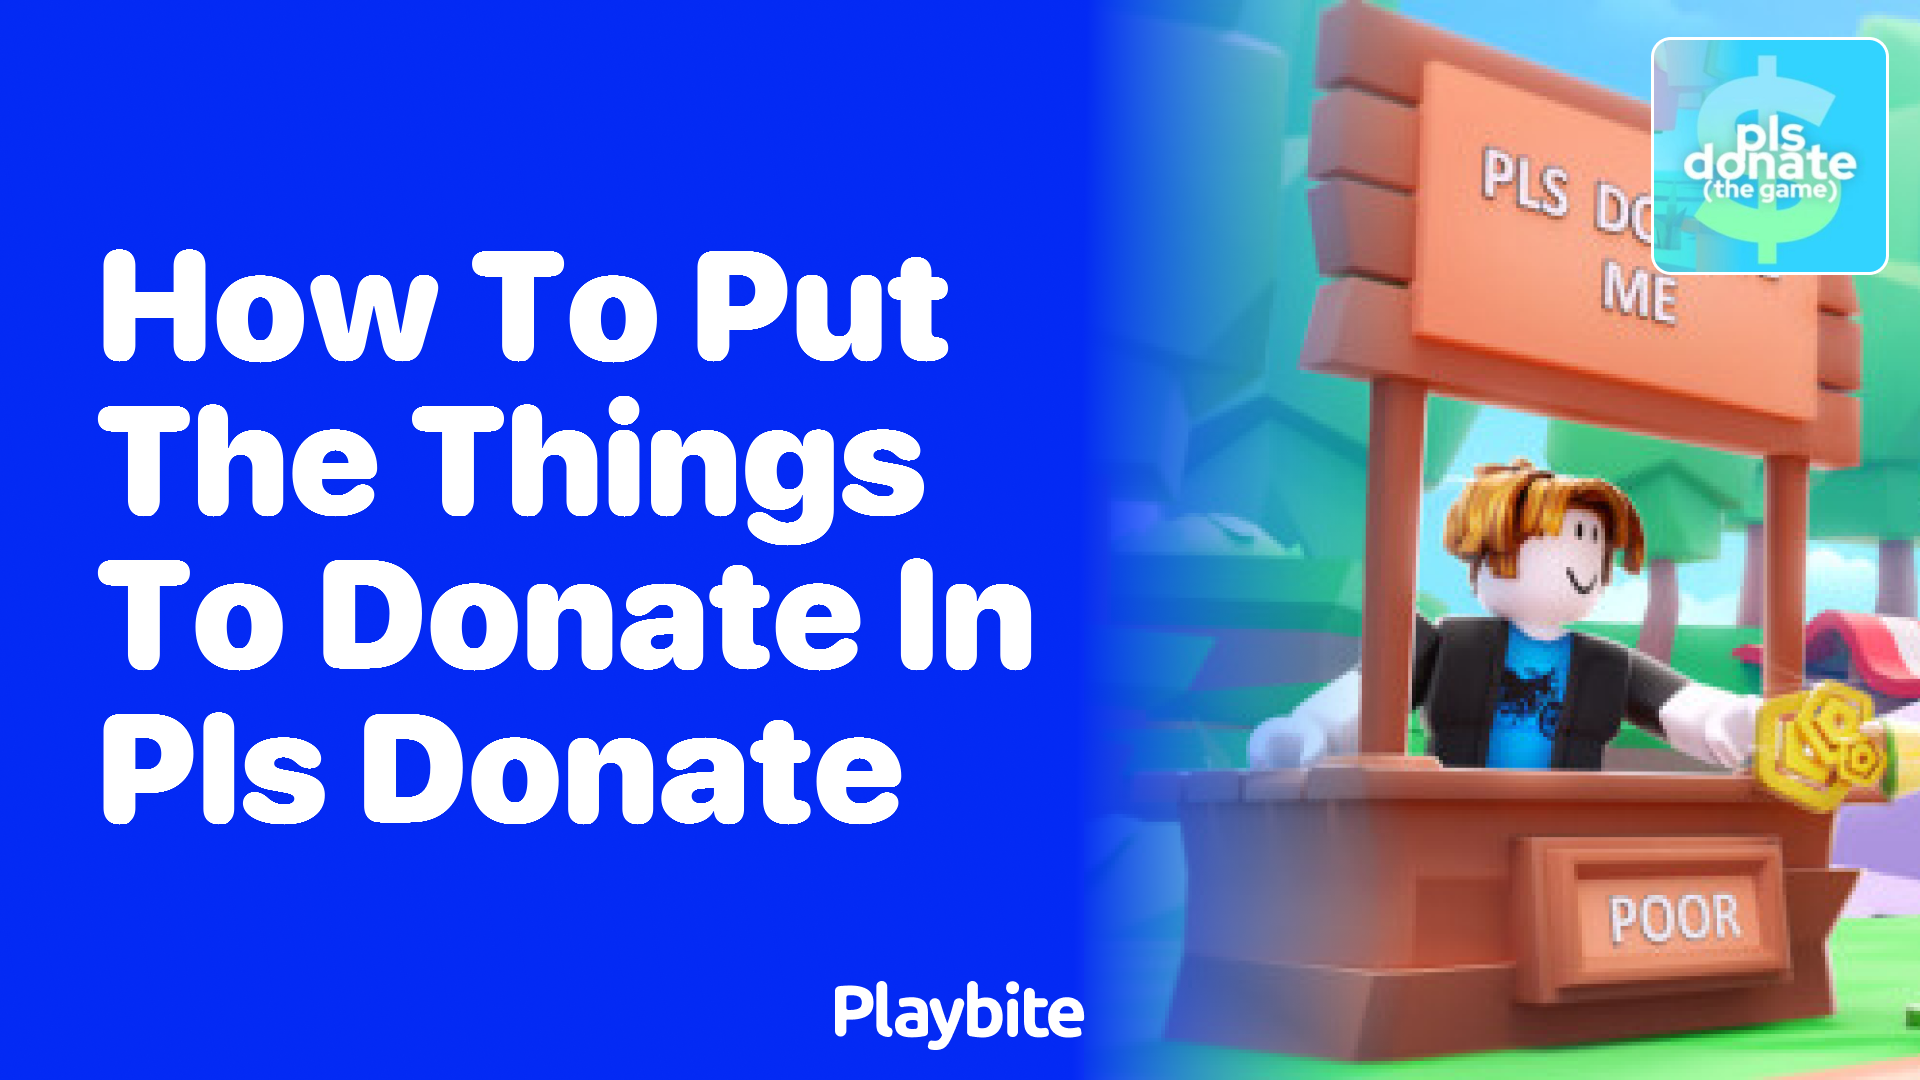 How to Put Things to Donate in PLS DONATE on Roblox